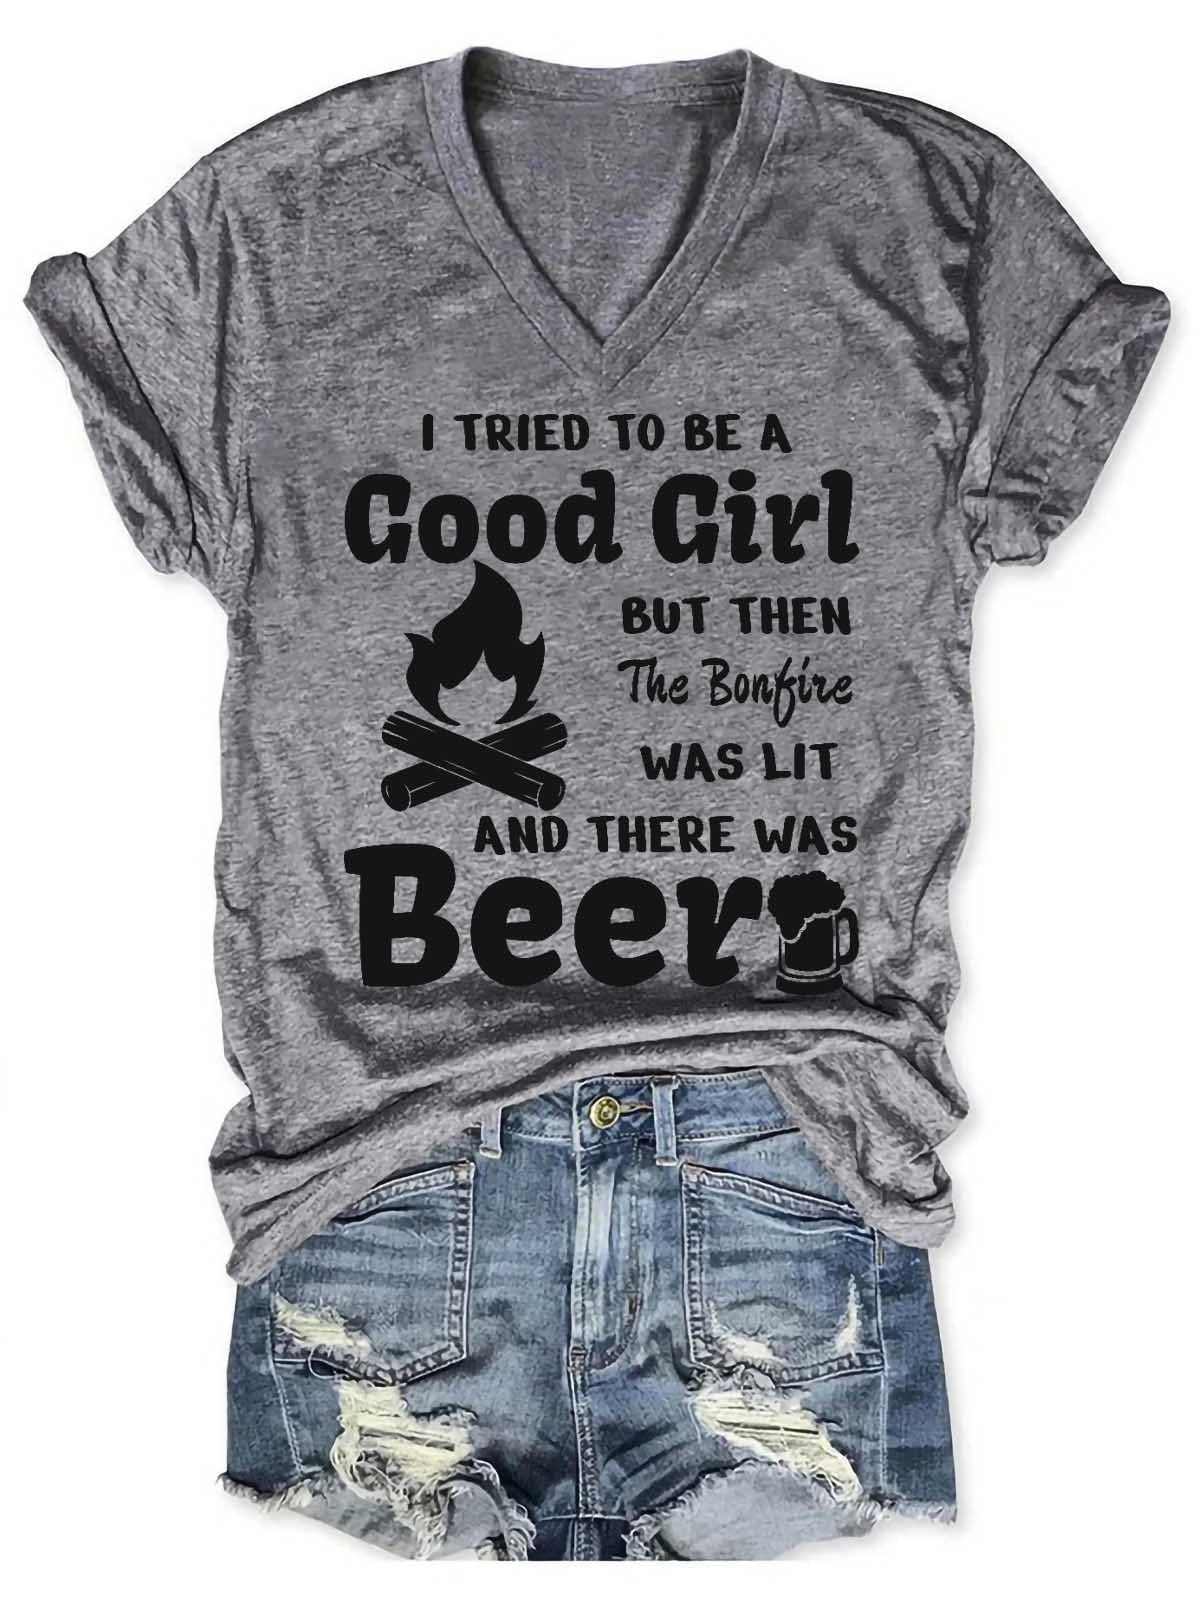 Women's I Tried To Be A Good Girl But Then The Bonfire Was Lit And There Was Beer V-Neck T-Shirt - Outlets Forever